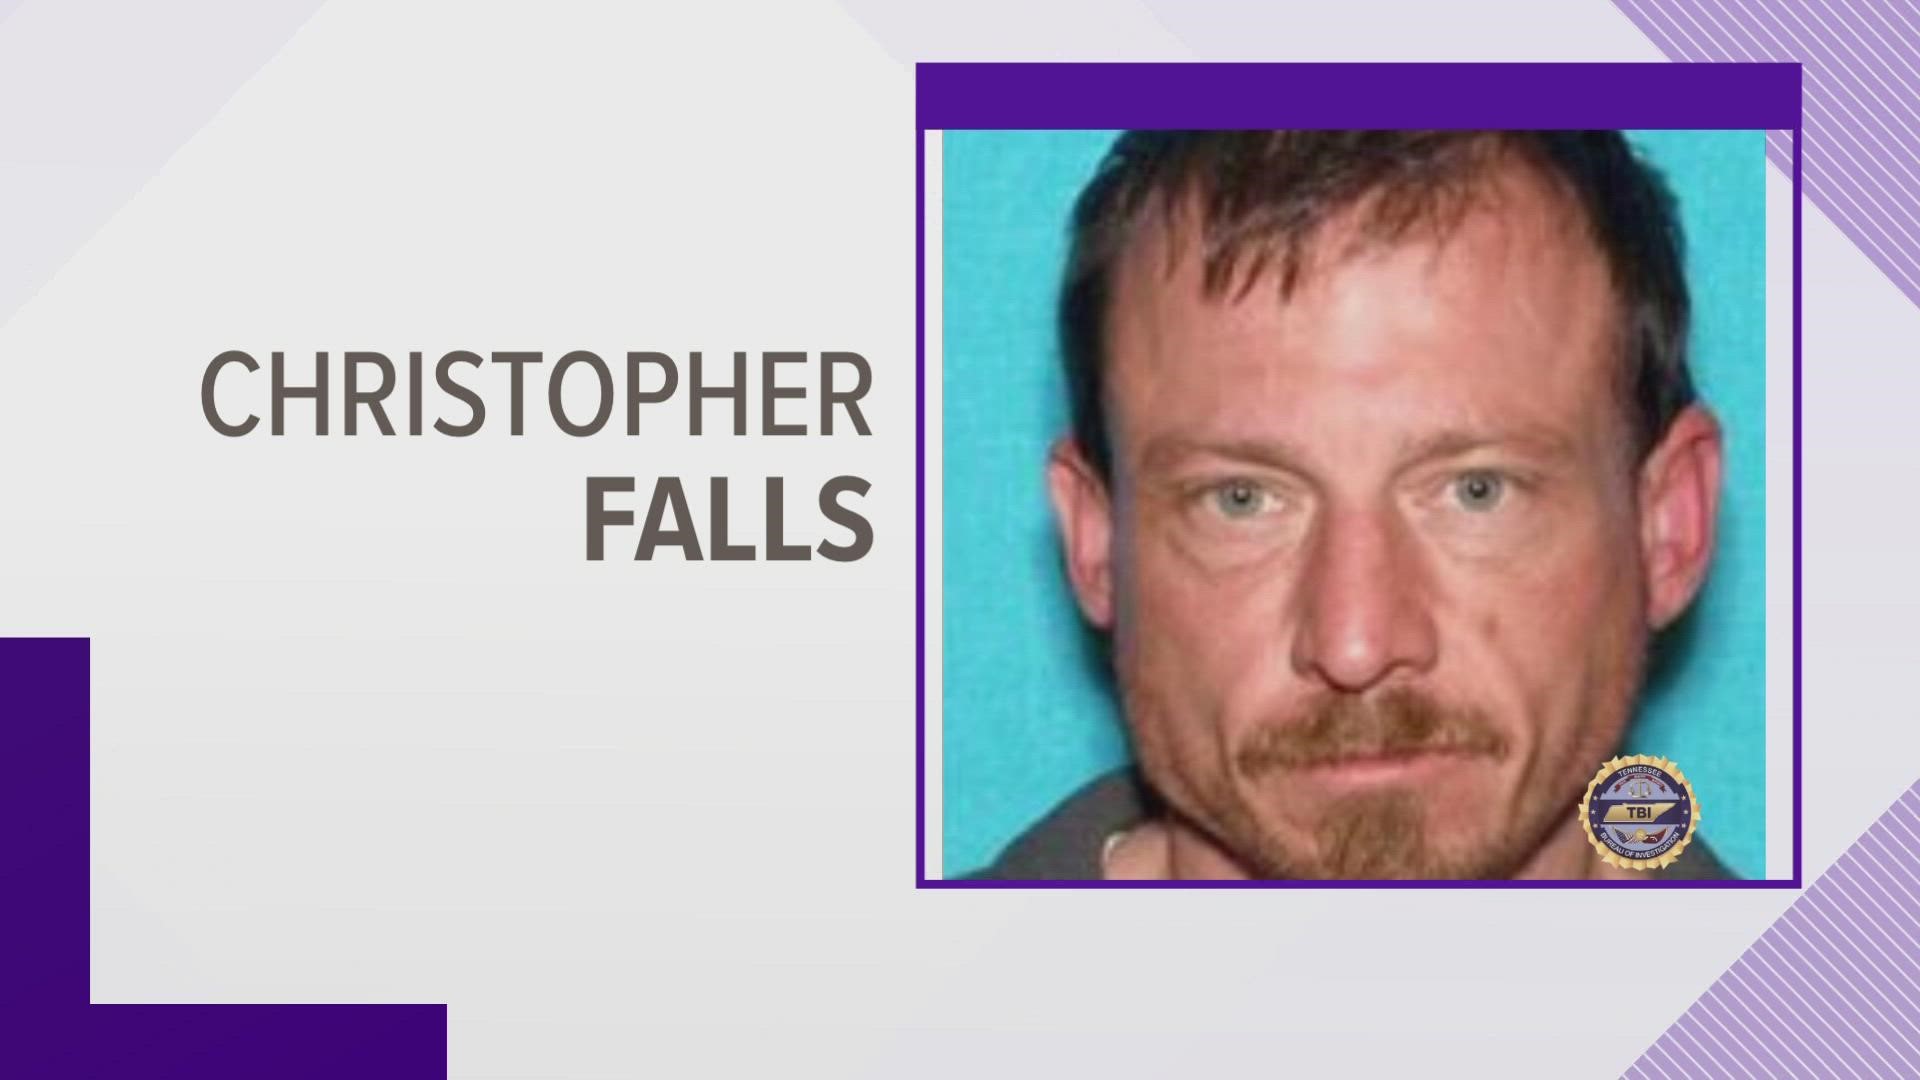 Christopher Strater Falls, 41, was wanted by the Morgan County Sheriff's Office and TBI for second-degree murder.